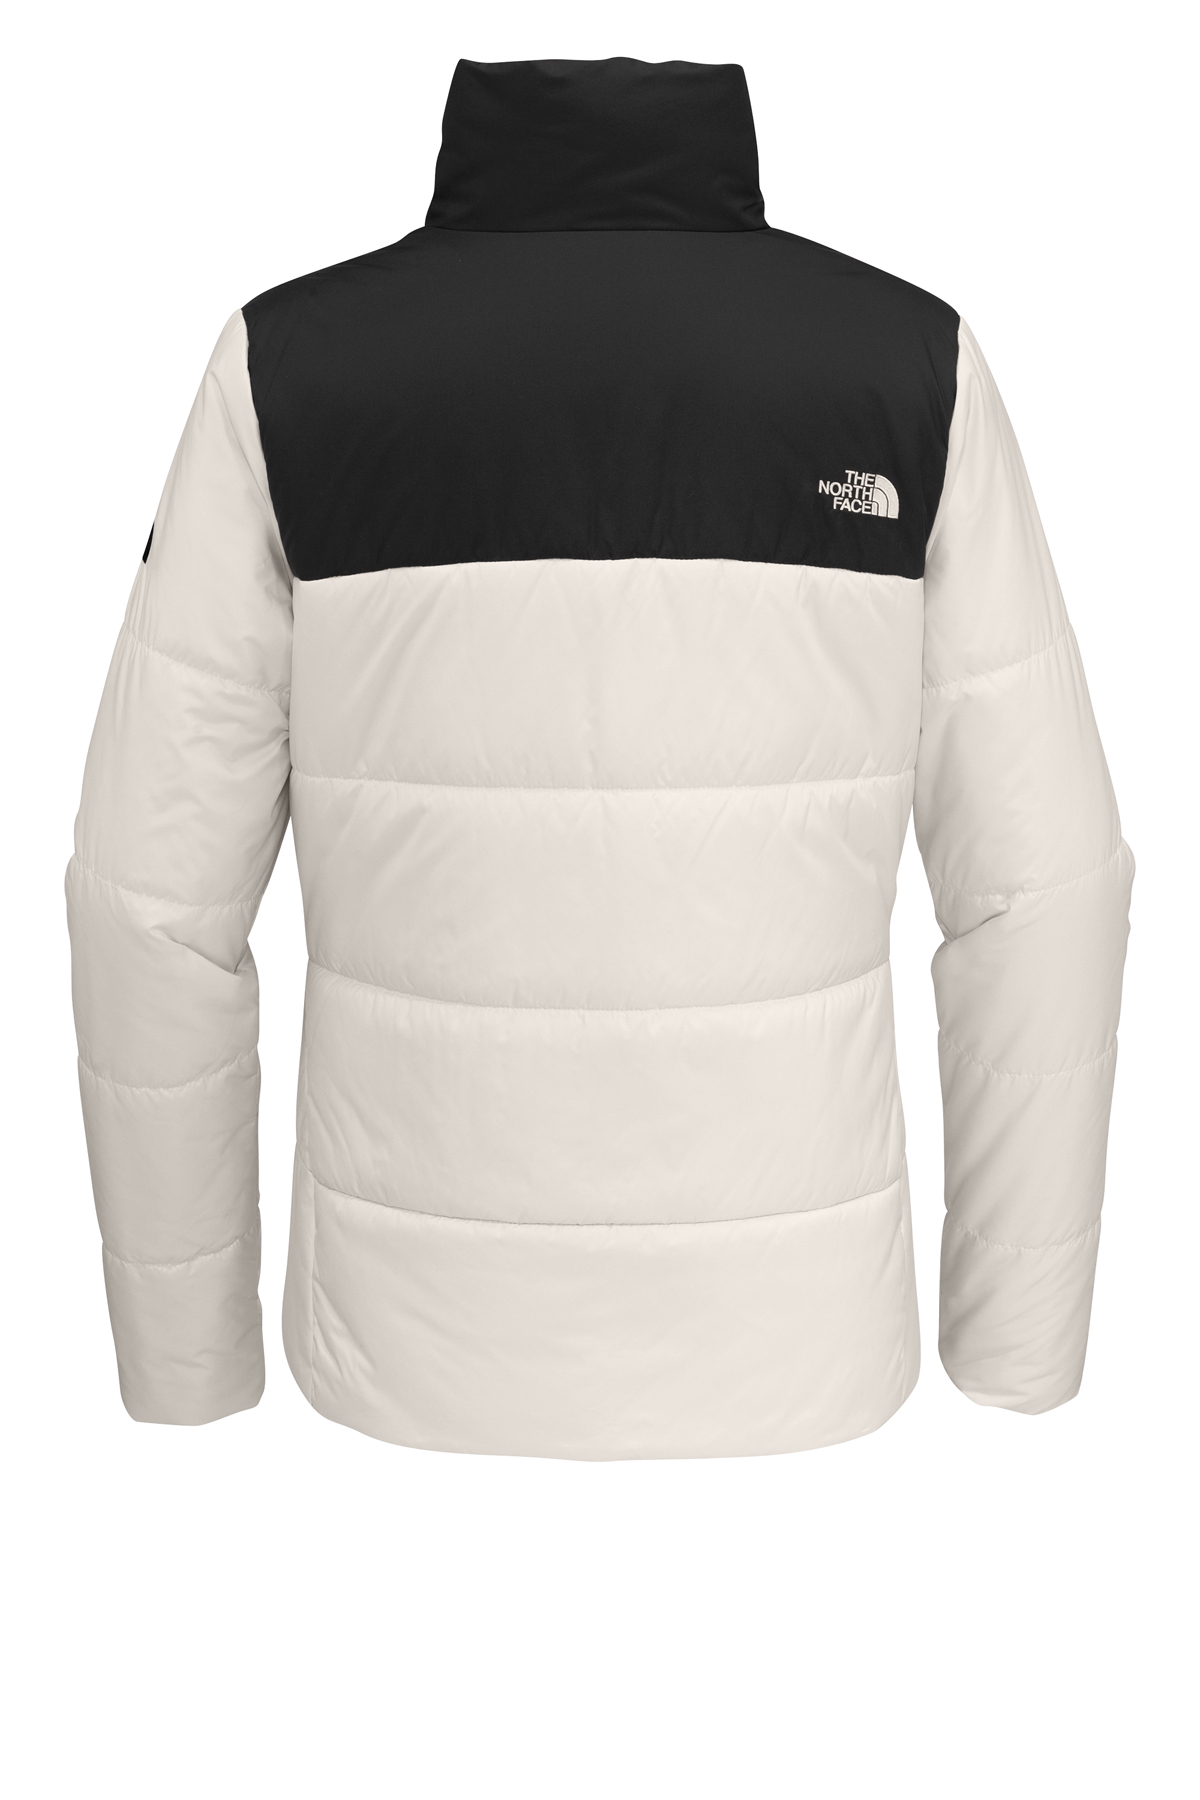 The North Face Ladies Everyday Insulated Jacket   Product   SanMar